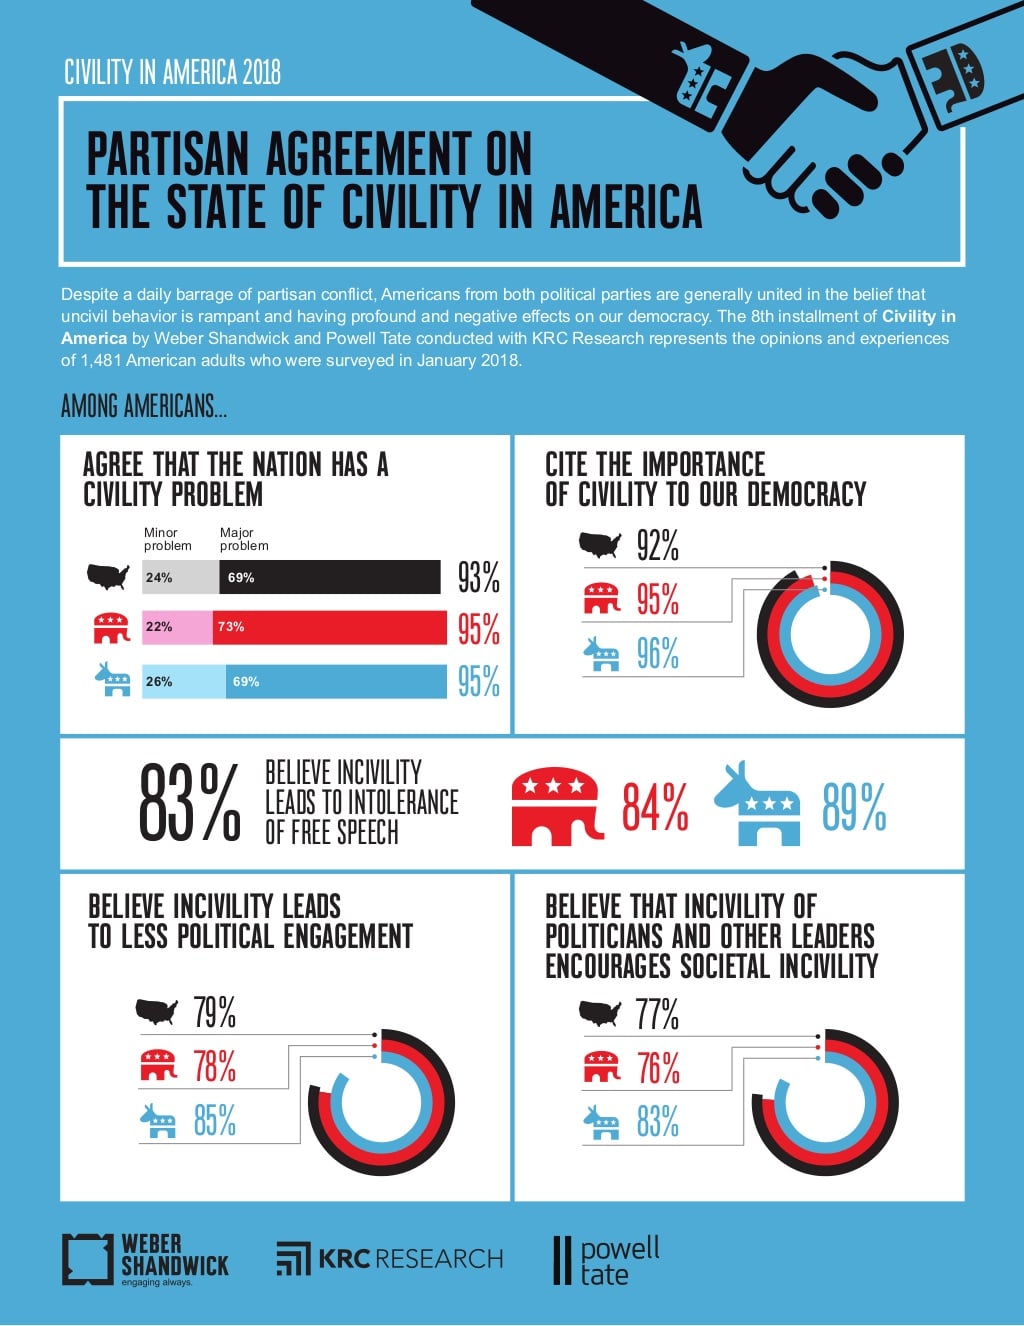 New Weber report finds erosion of political civility harming democracy